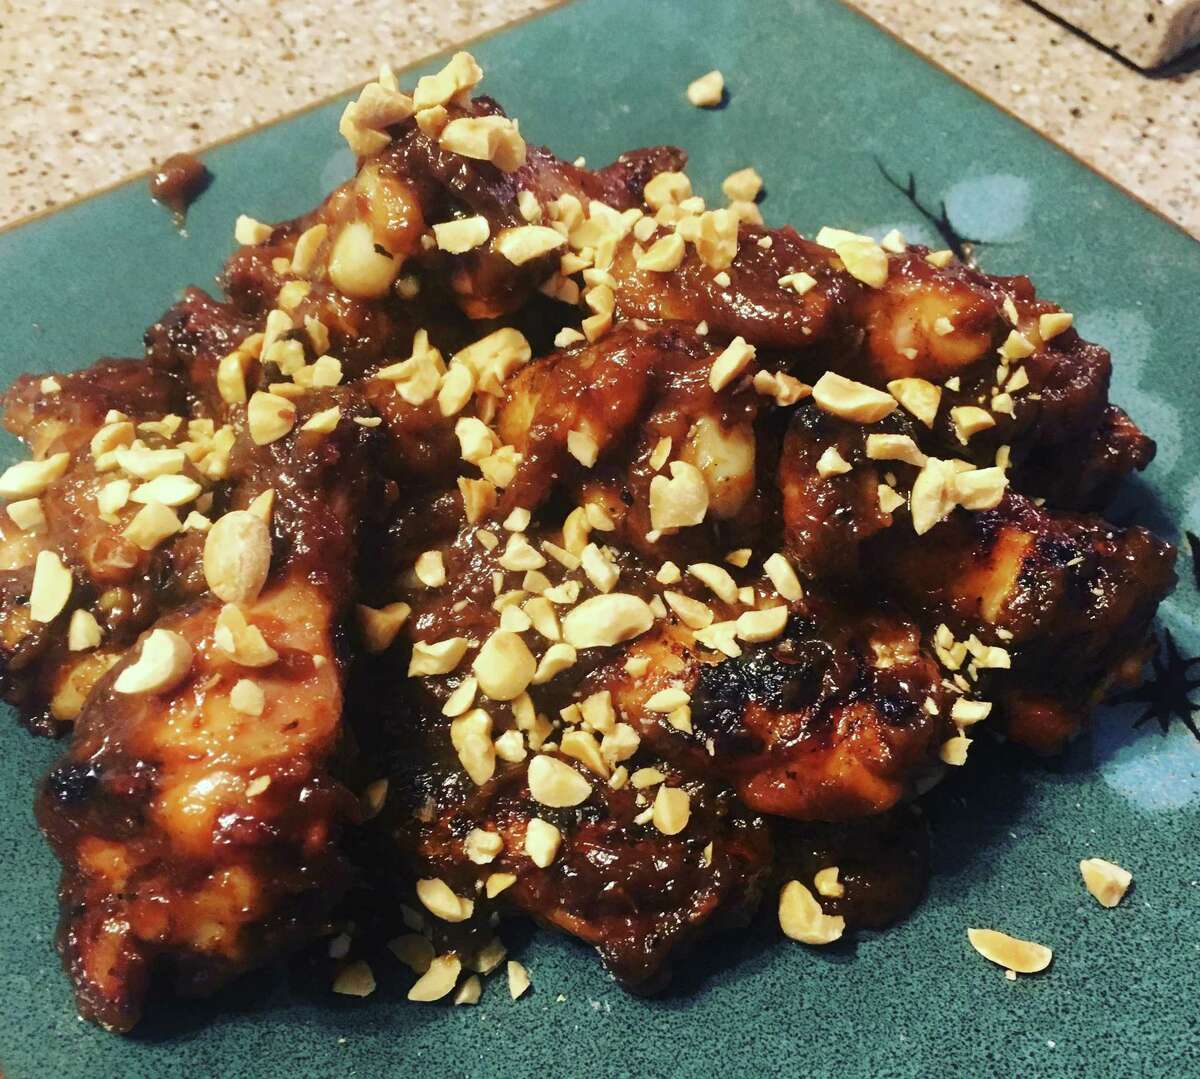 Peanut butter and jelly wings fresh off the grill.